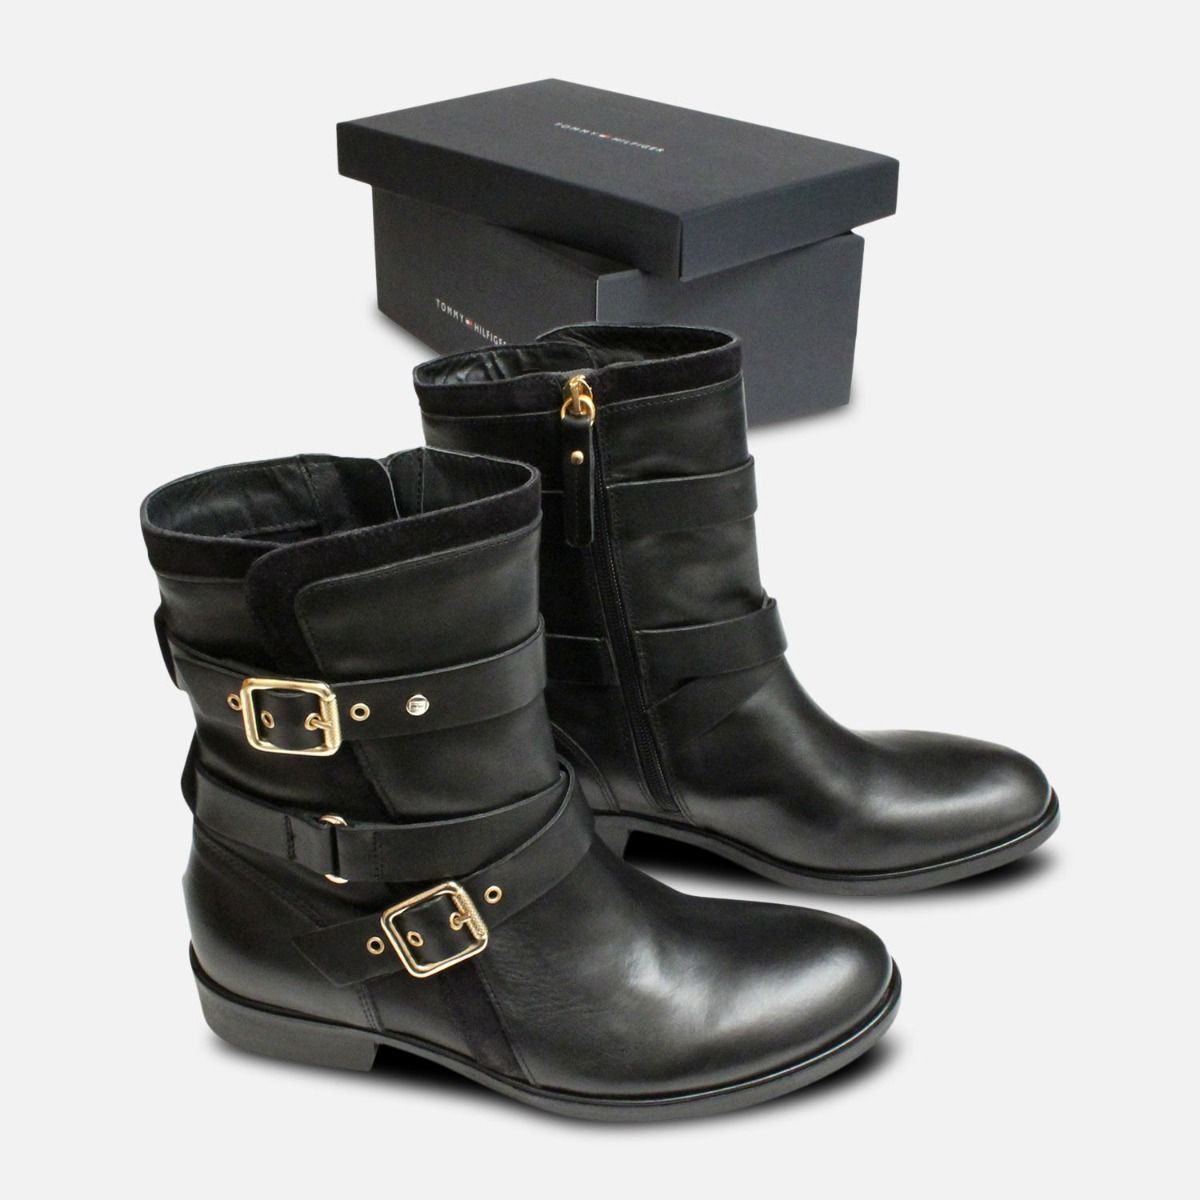 black boots gold